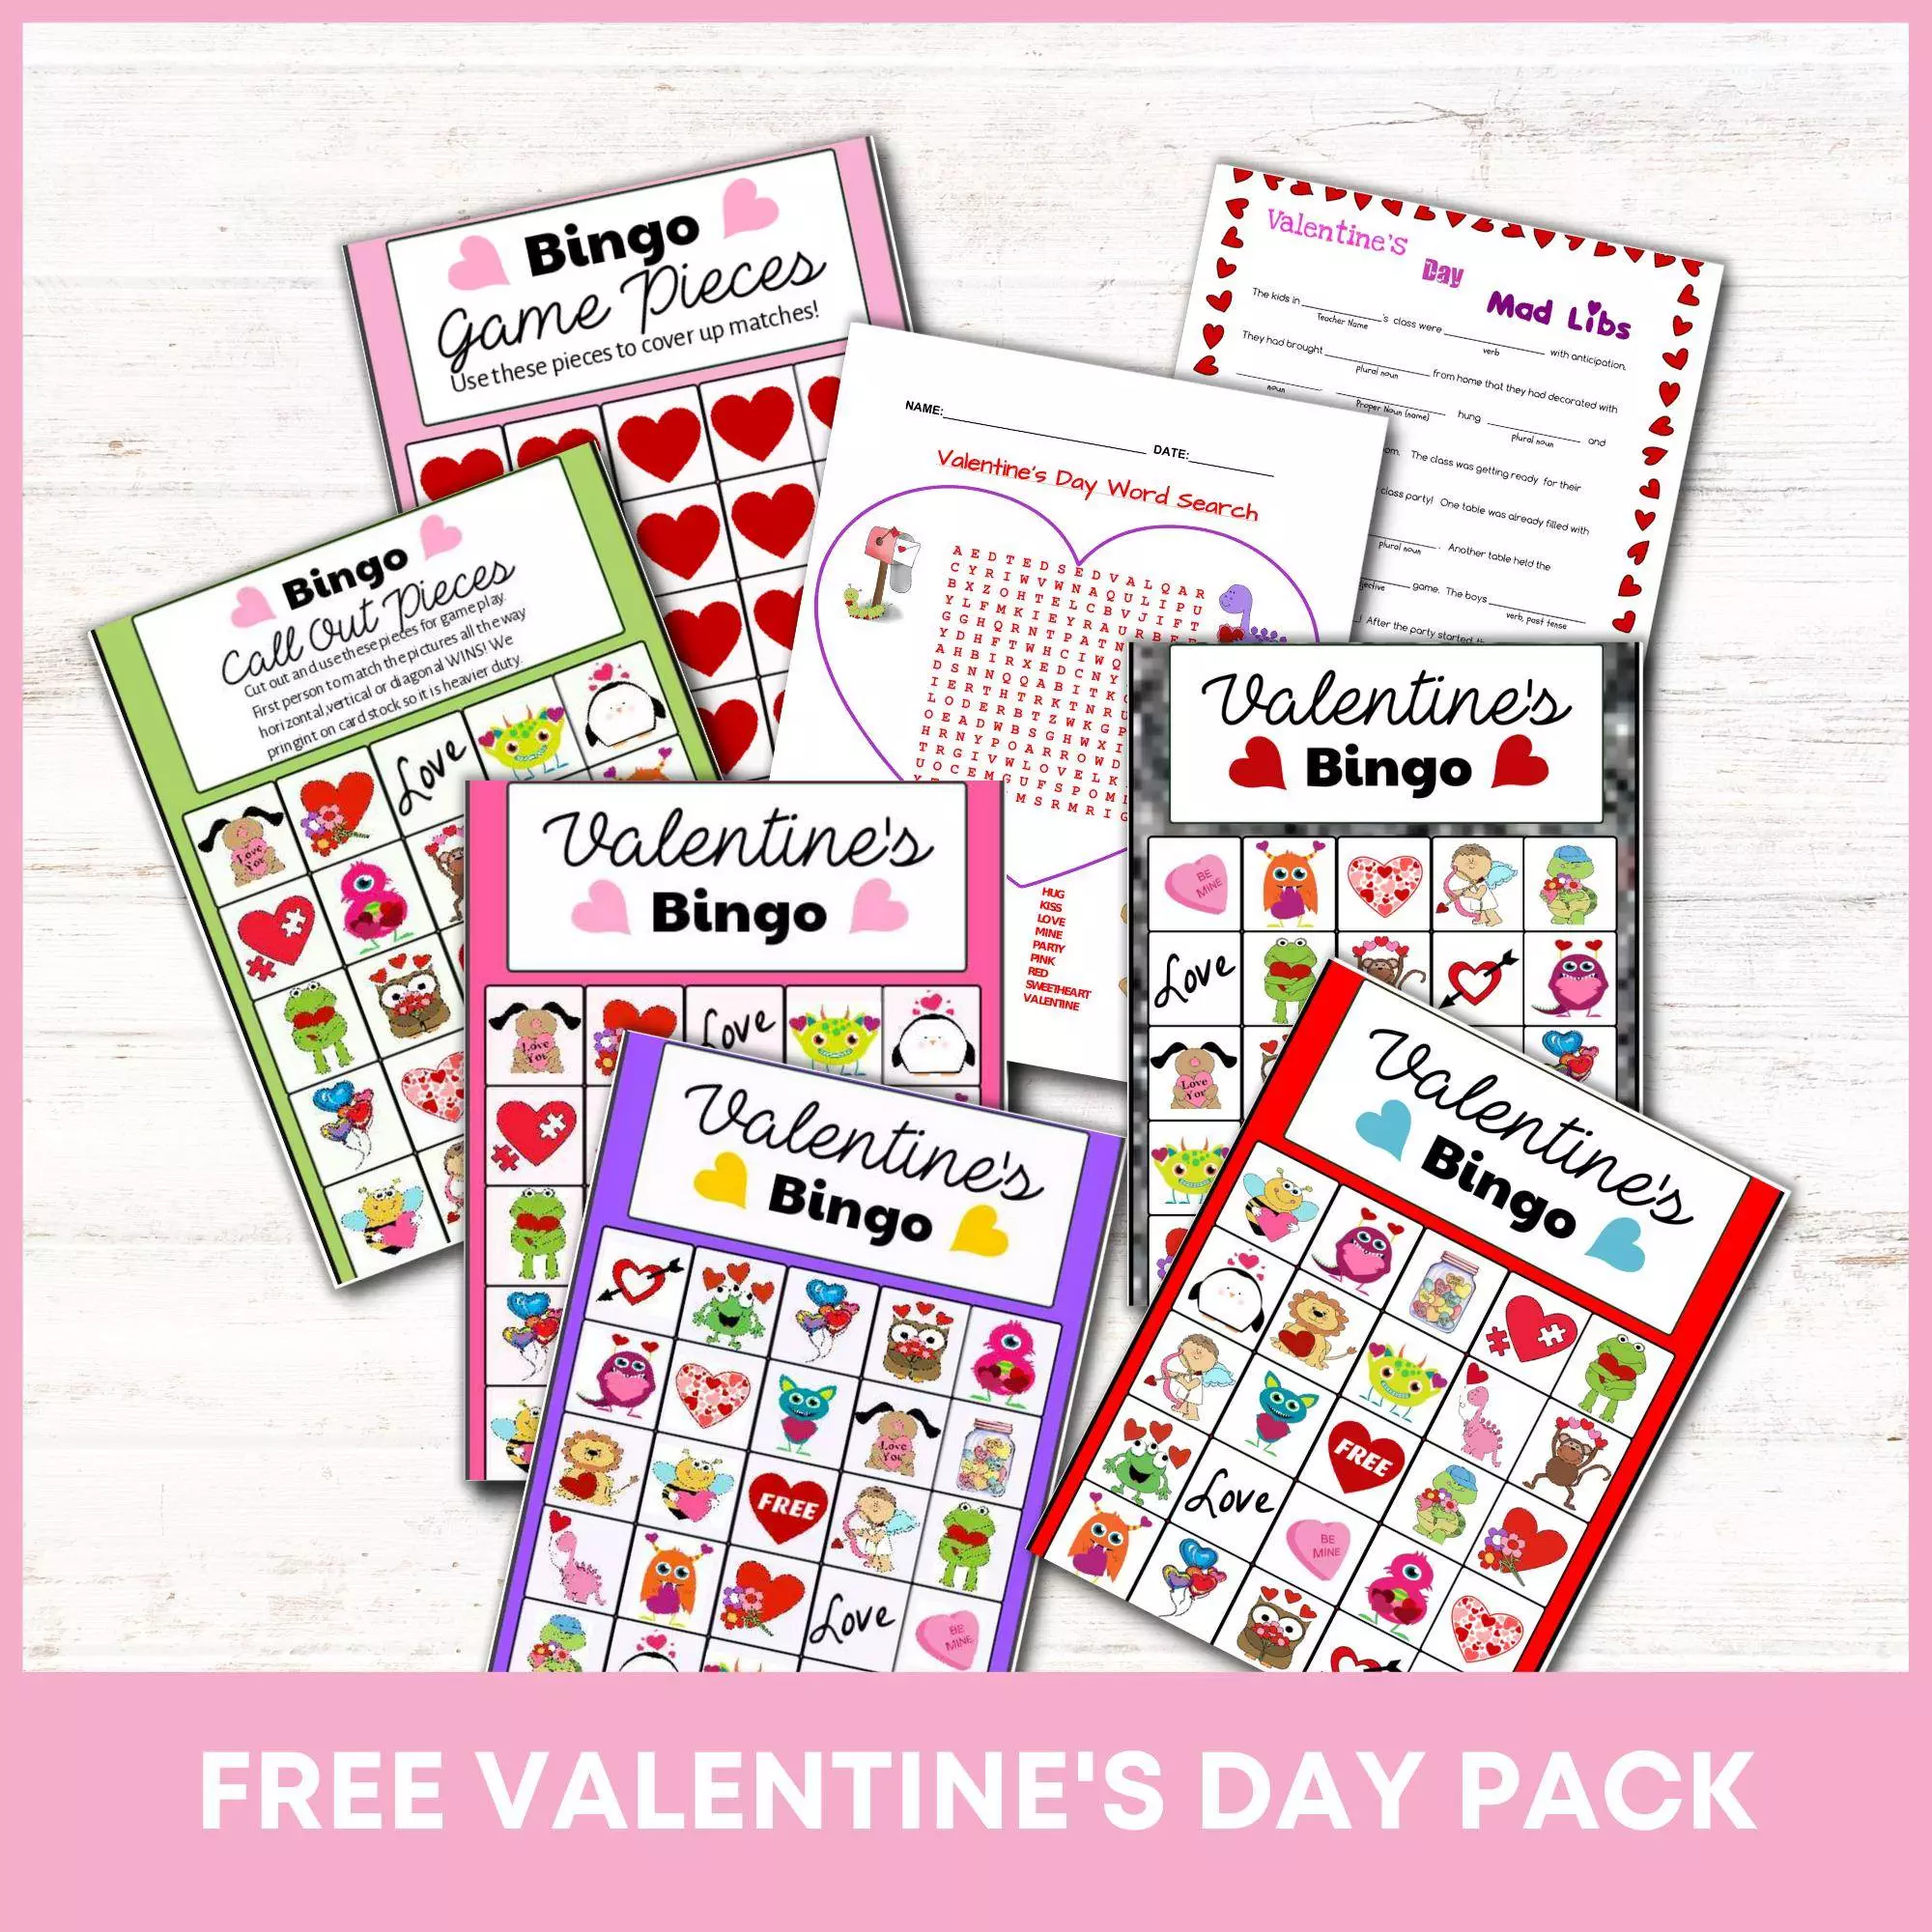 Valentines Day activity pack mockup